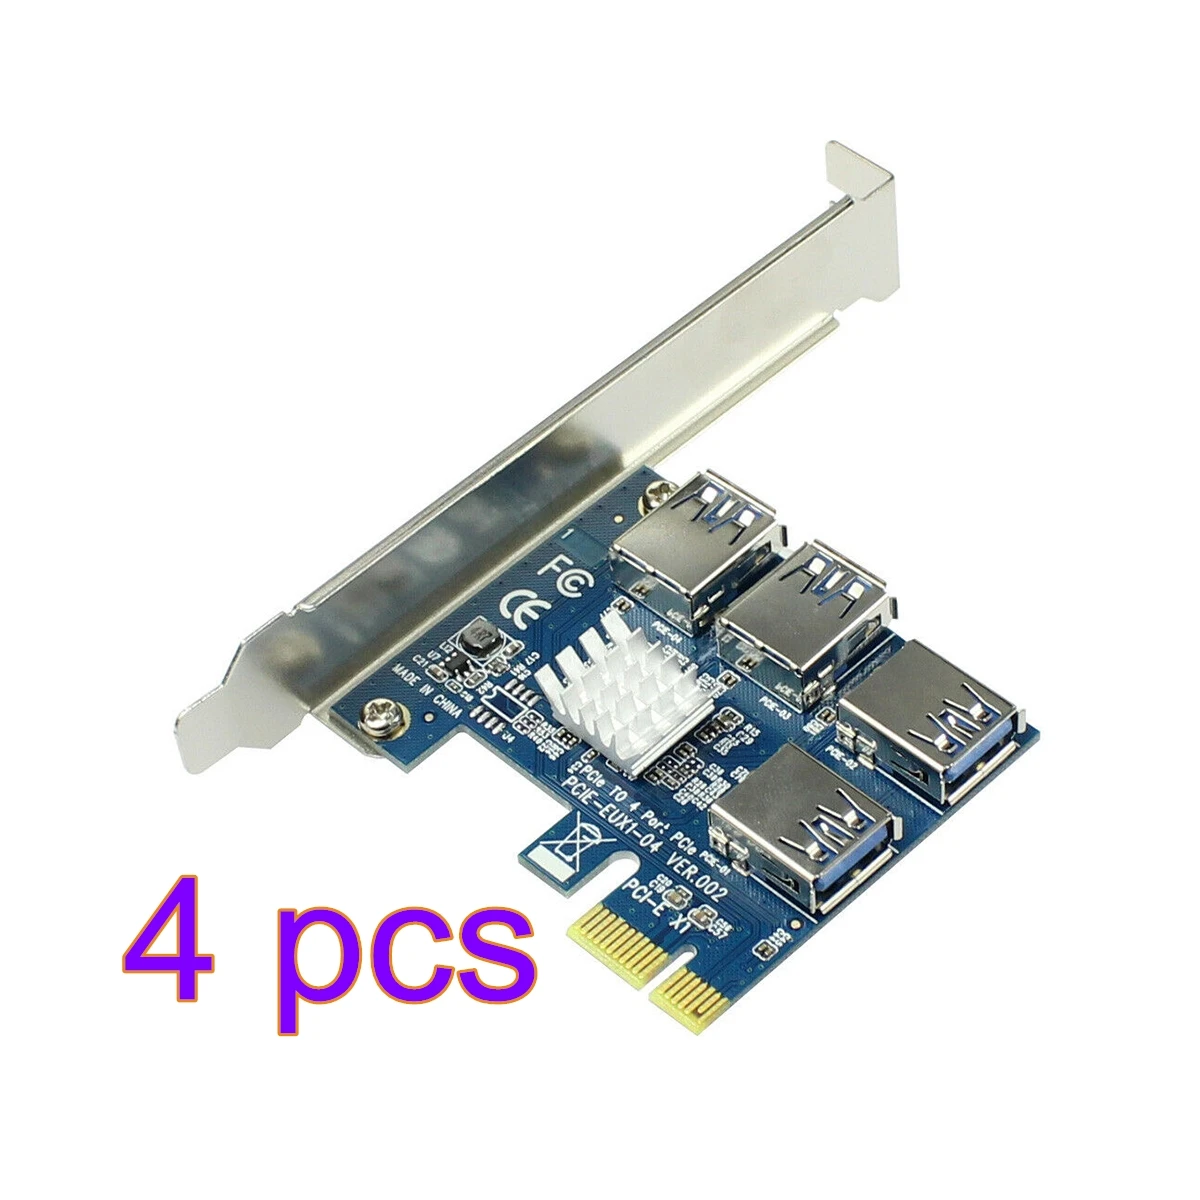 4 Pieces PCIE PCI-E PCI Express Riser Card 1x to 16x 1 to 4 USB 3.0 Slot Multiplier Hub Adapter For Bitcoin Mining BTC Devices